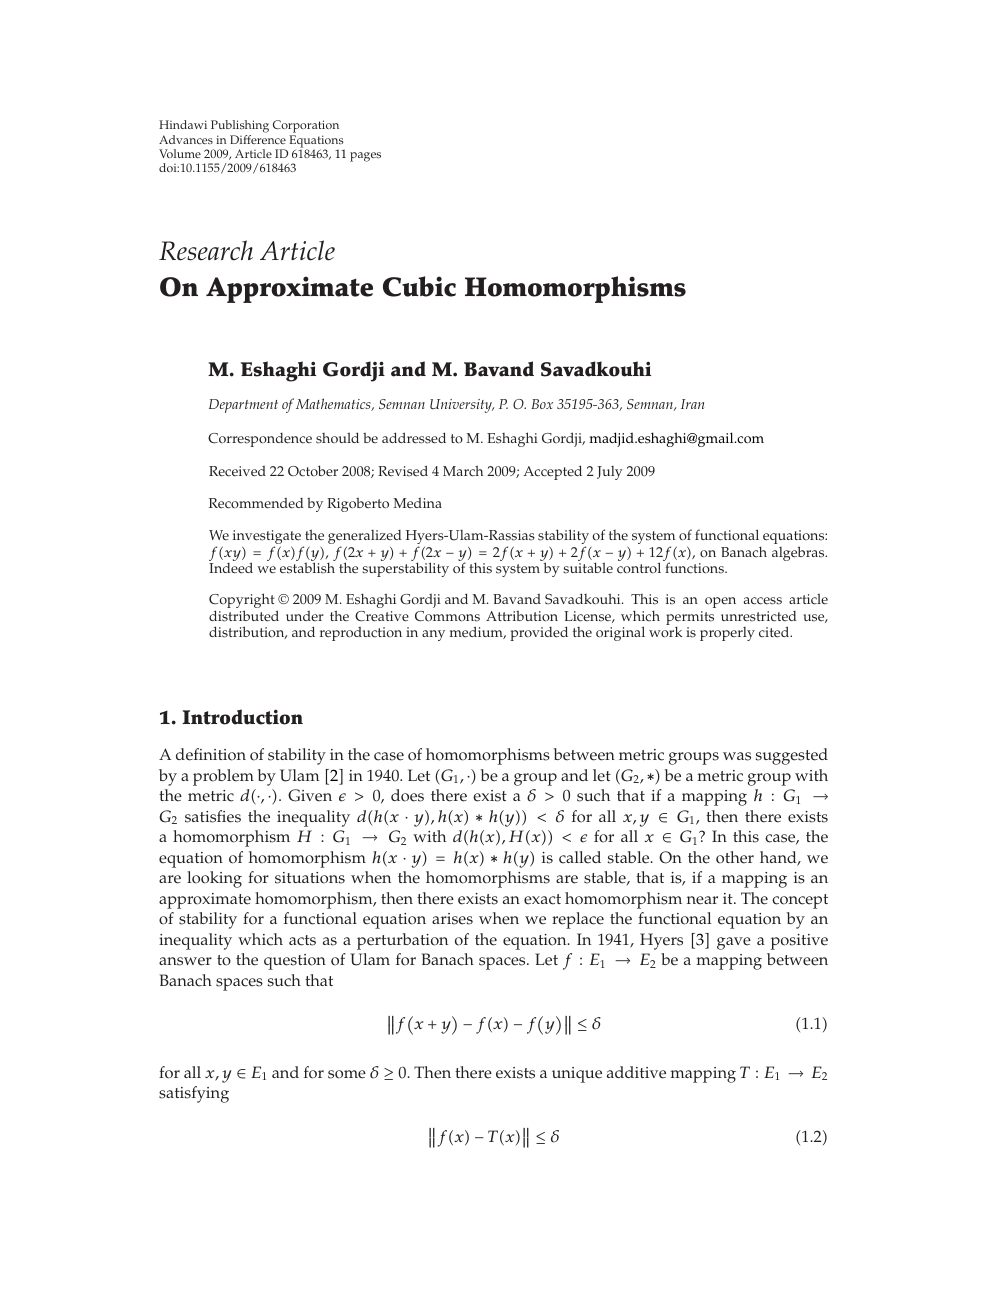 On Approximate Cubic Homomorphisms Topic Of Research Paper In Mathematics Download Scholarly Article Pdf And Read For Free On Cyberleninka Open Science Hub